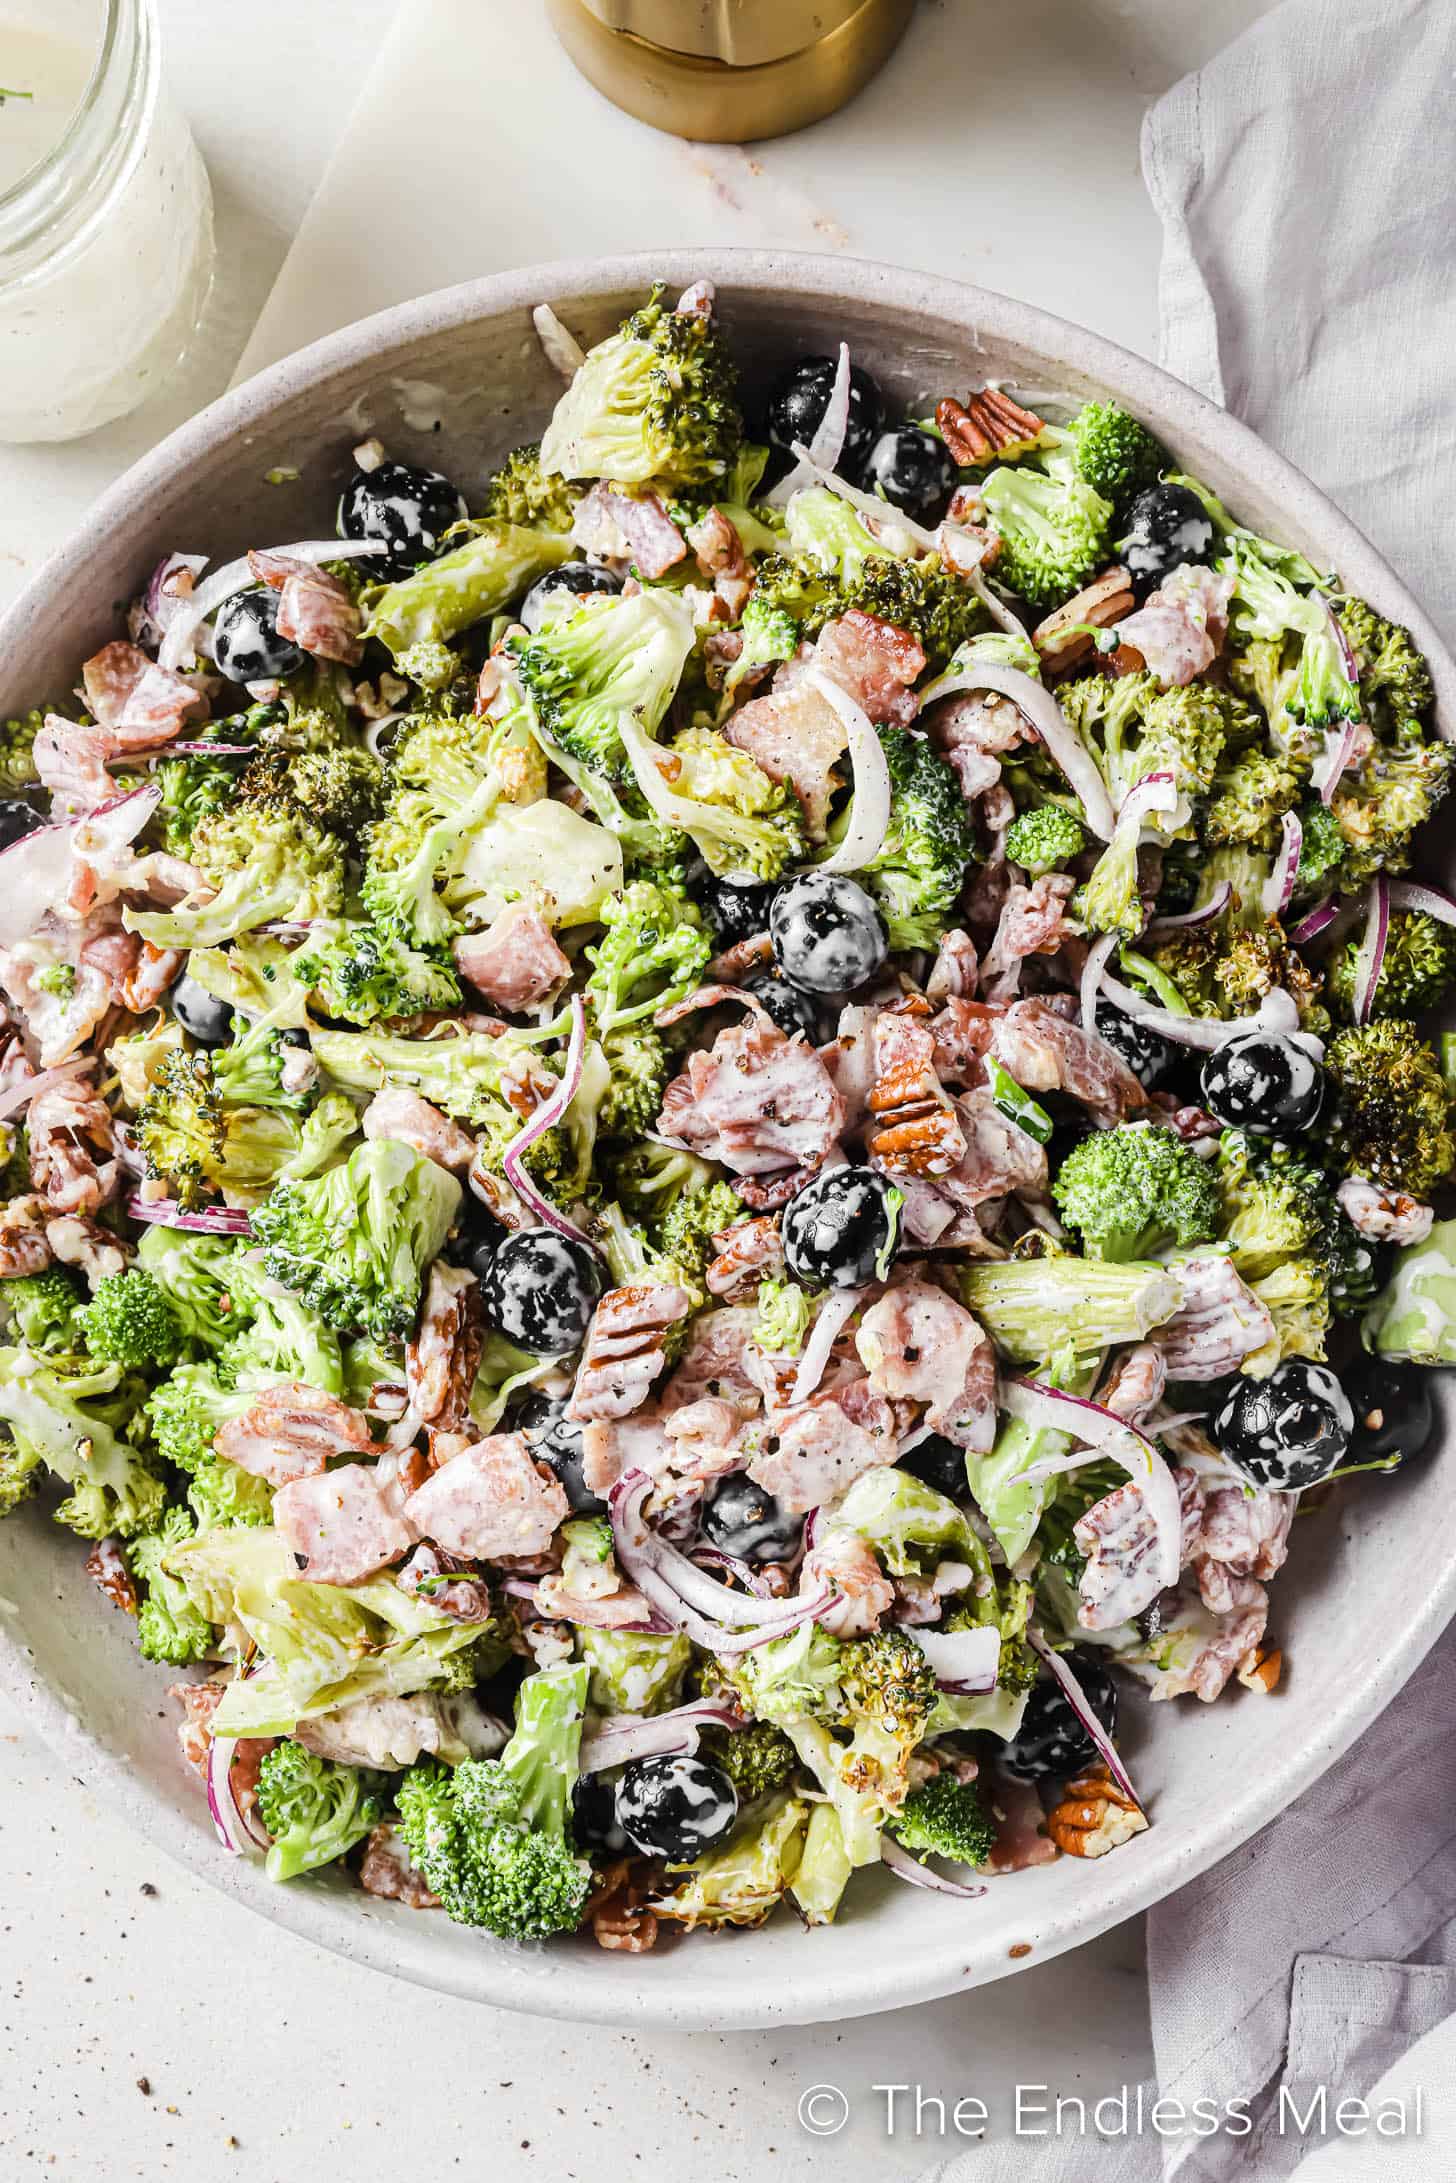 A close up of Blueberry Broccoli Salad in a salad bowl